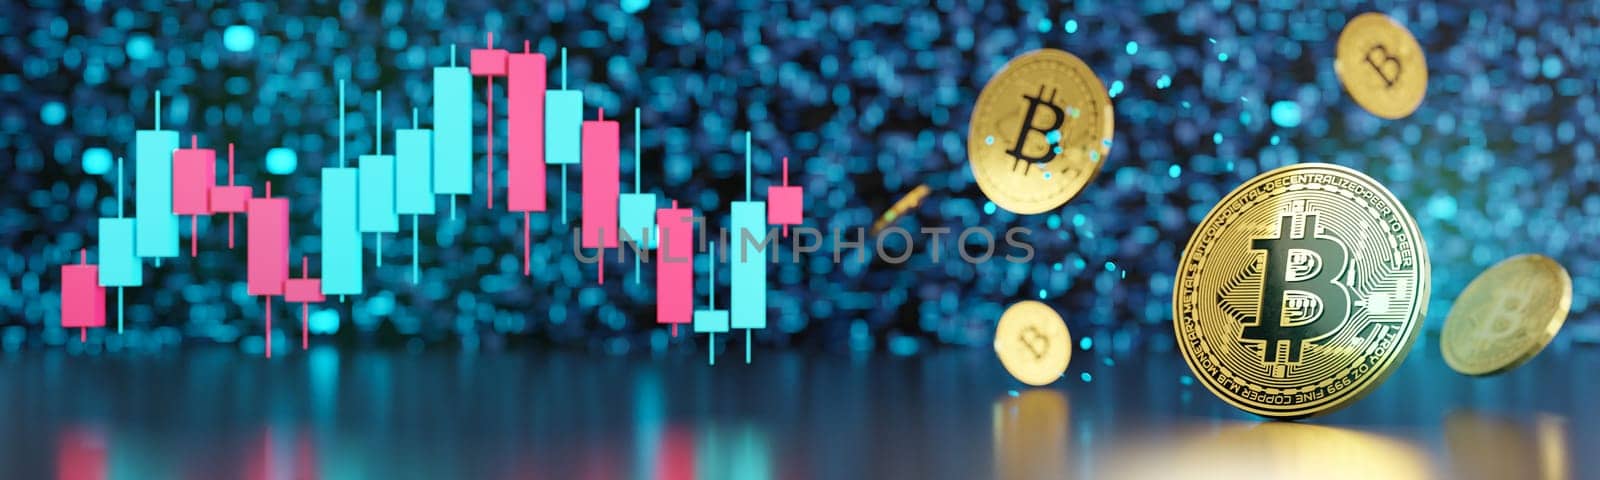 Crypto trading. Trade cryptocurrencies, digital currency. Bitcoin with traiding graph charts, candlesticks. Mining or block chain technology. Profit opportunity, investing. Online, network money. 3D. by creativebird